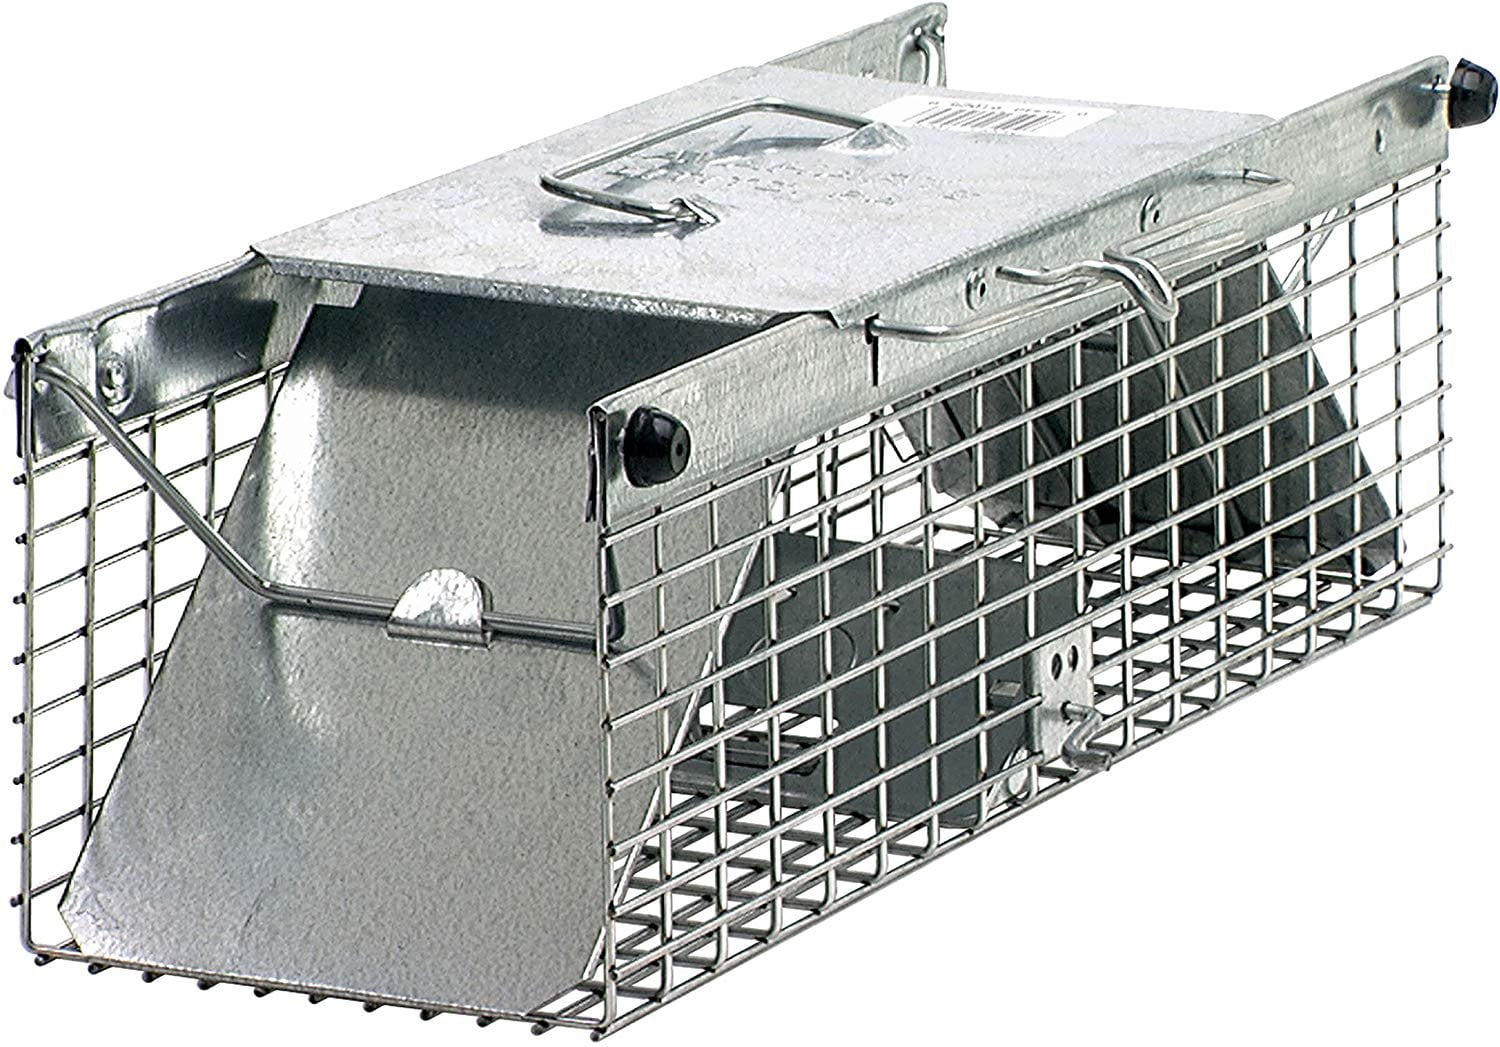 Havahart 1025 Small 2 Door Live Animal Trap Ideal For Catching Squirrels Chipmunks Rats Weasels Walmart Com